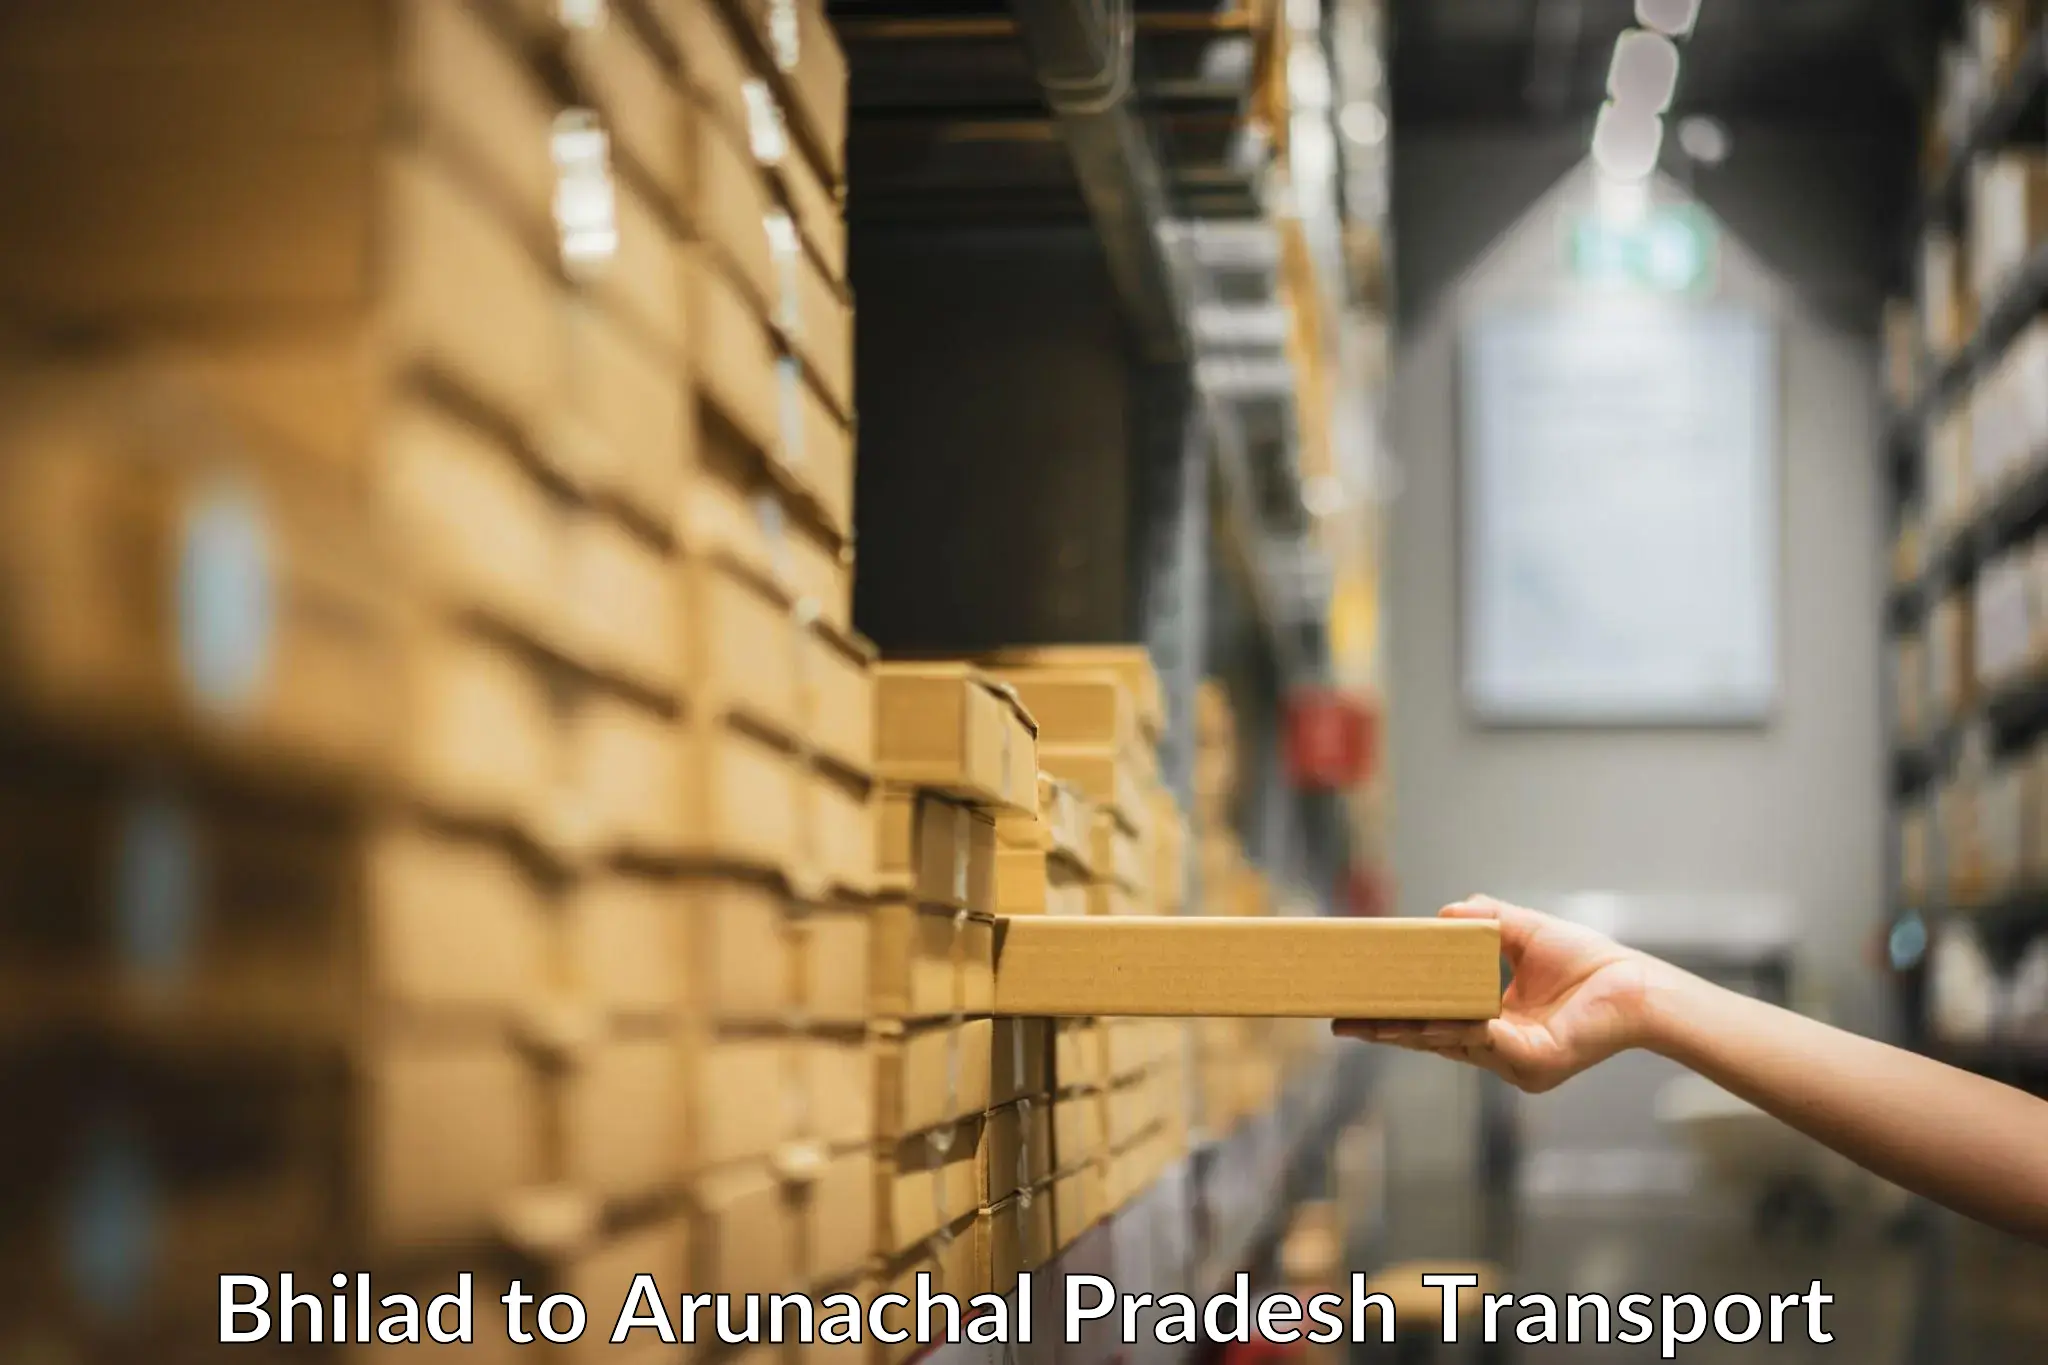 Truck transport companies in India Bhilad to Pasighat